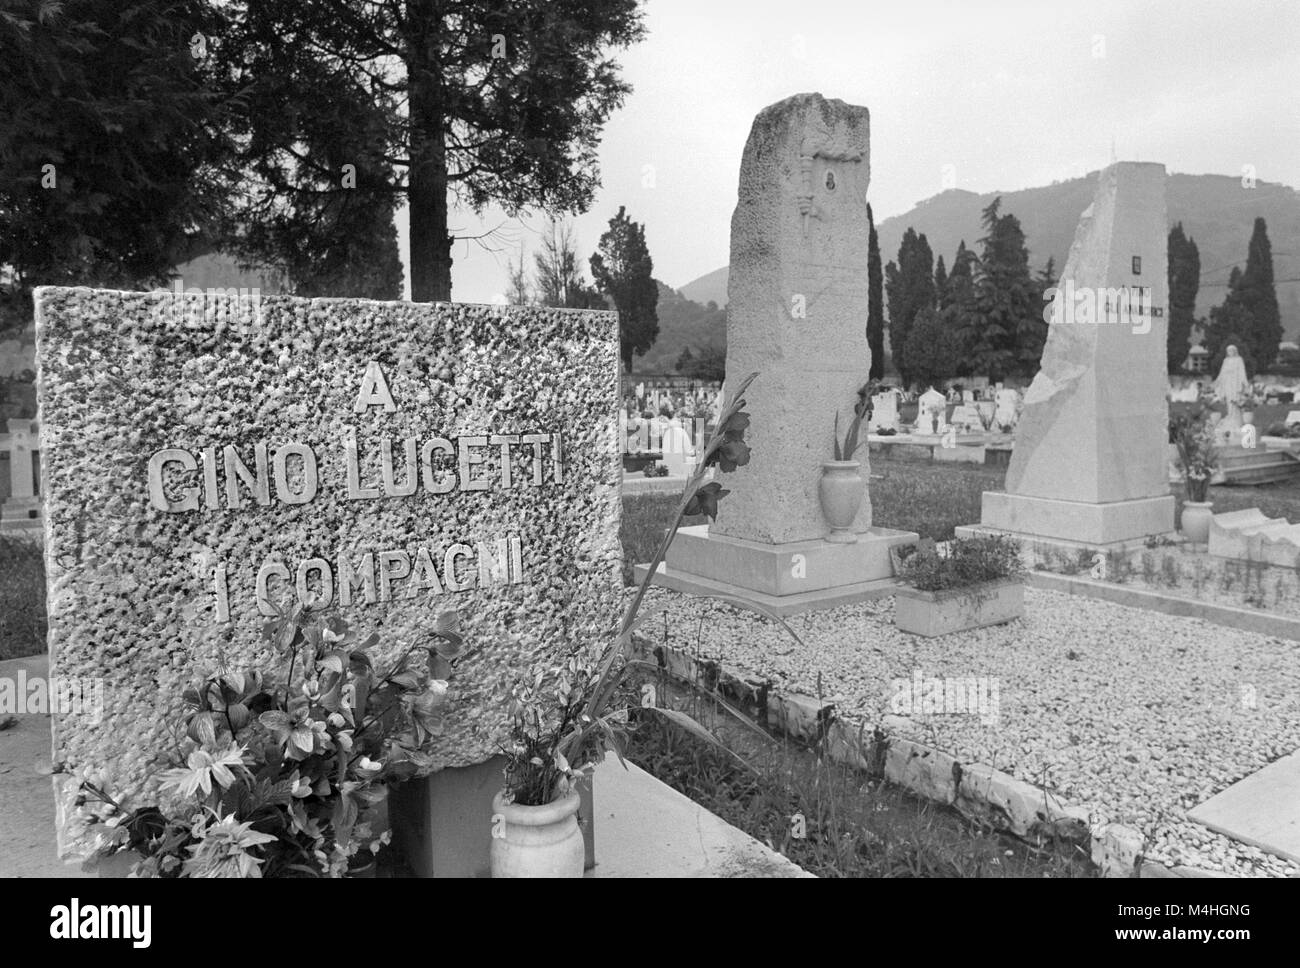 Graves of anarchists in the cemetery of Carrara (Italy, 1986) Stock Photo